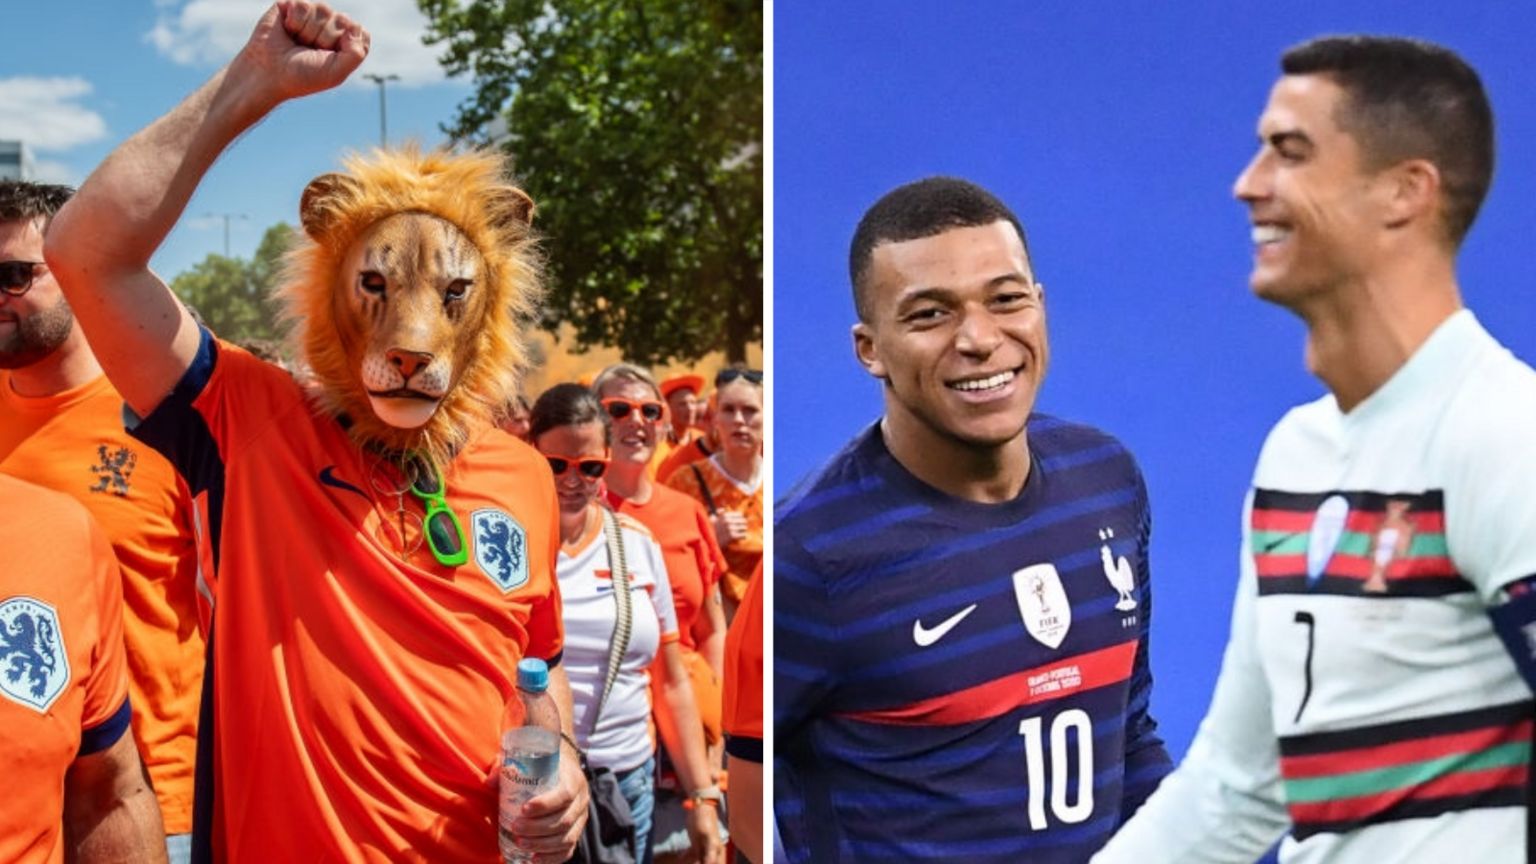 A picture of a man dressed as a lion in a Dutch fan walk and another picture of Cristiano Ronaldo and Kylian Mbappe on the football pitch